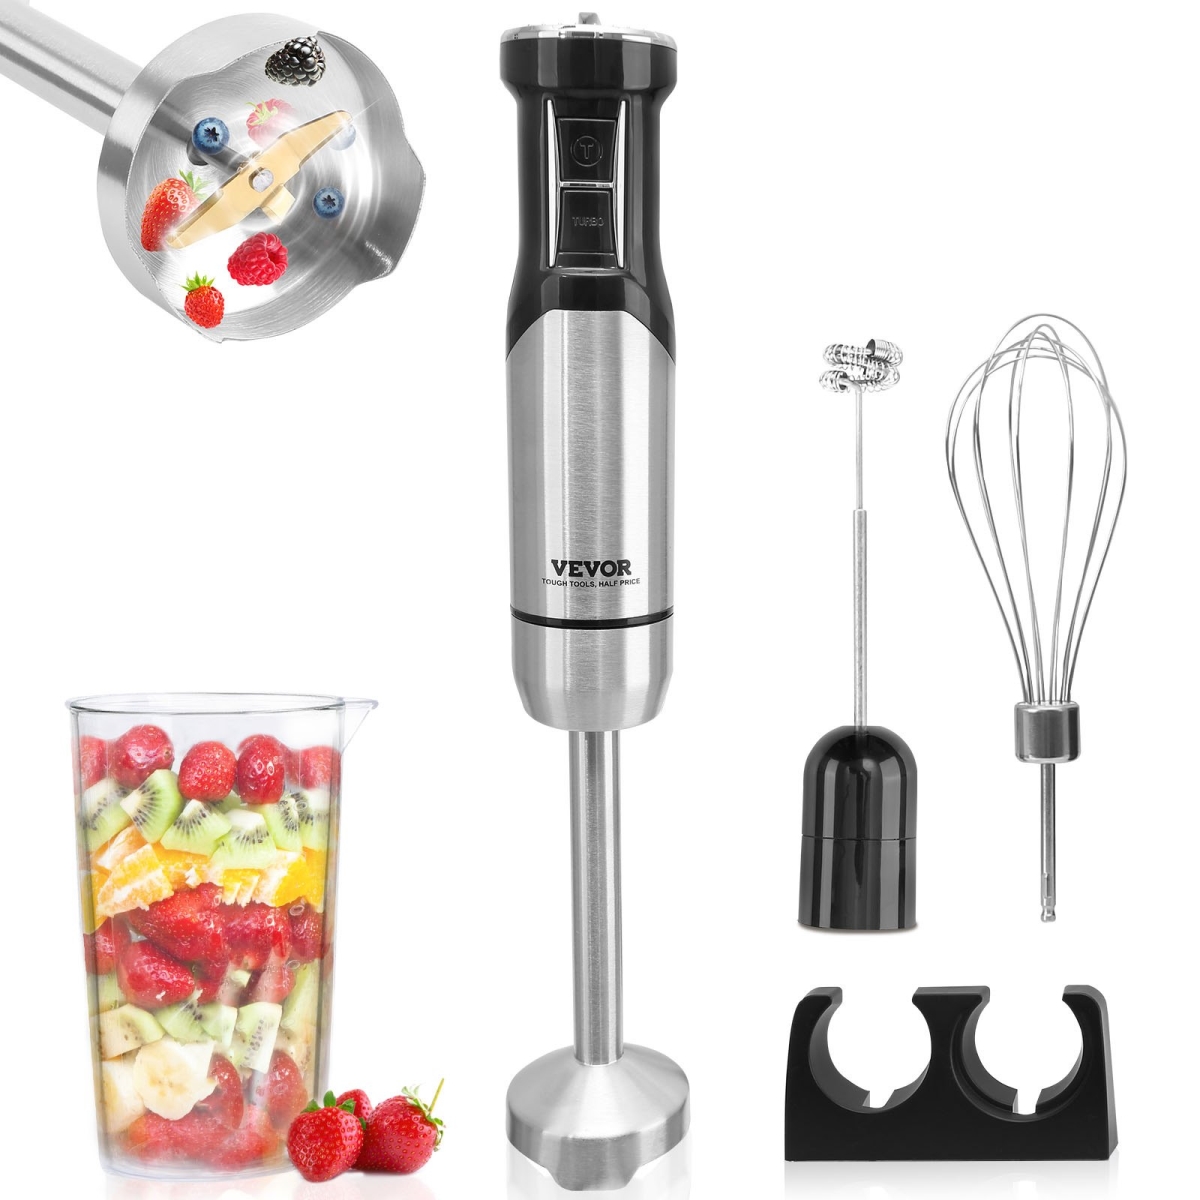 Picture of Vevor QXCDSC500W124VXWTV1 Commercial Immersion Blender with 12-Speed Heavy Duty Immersion - Silver